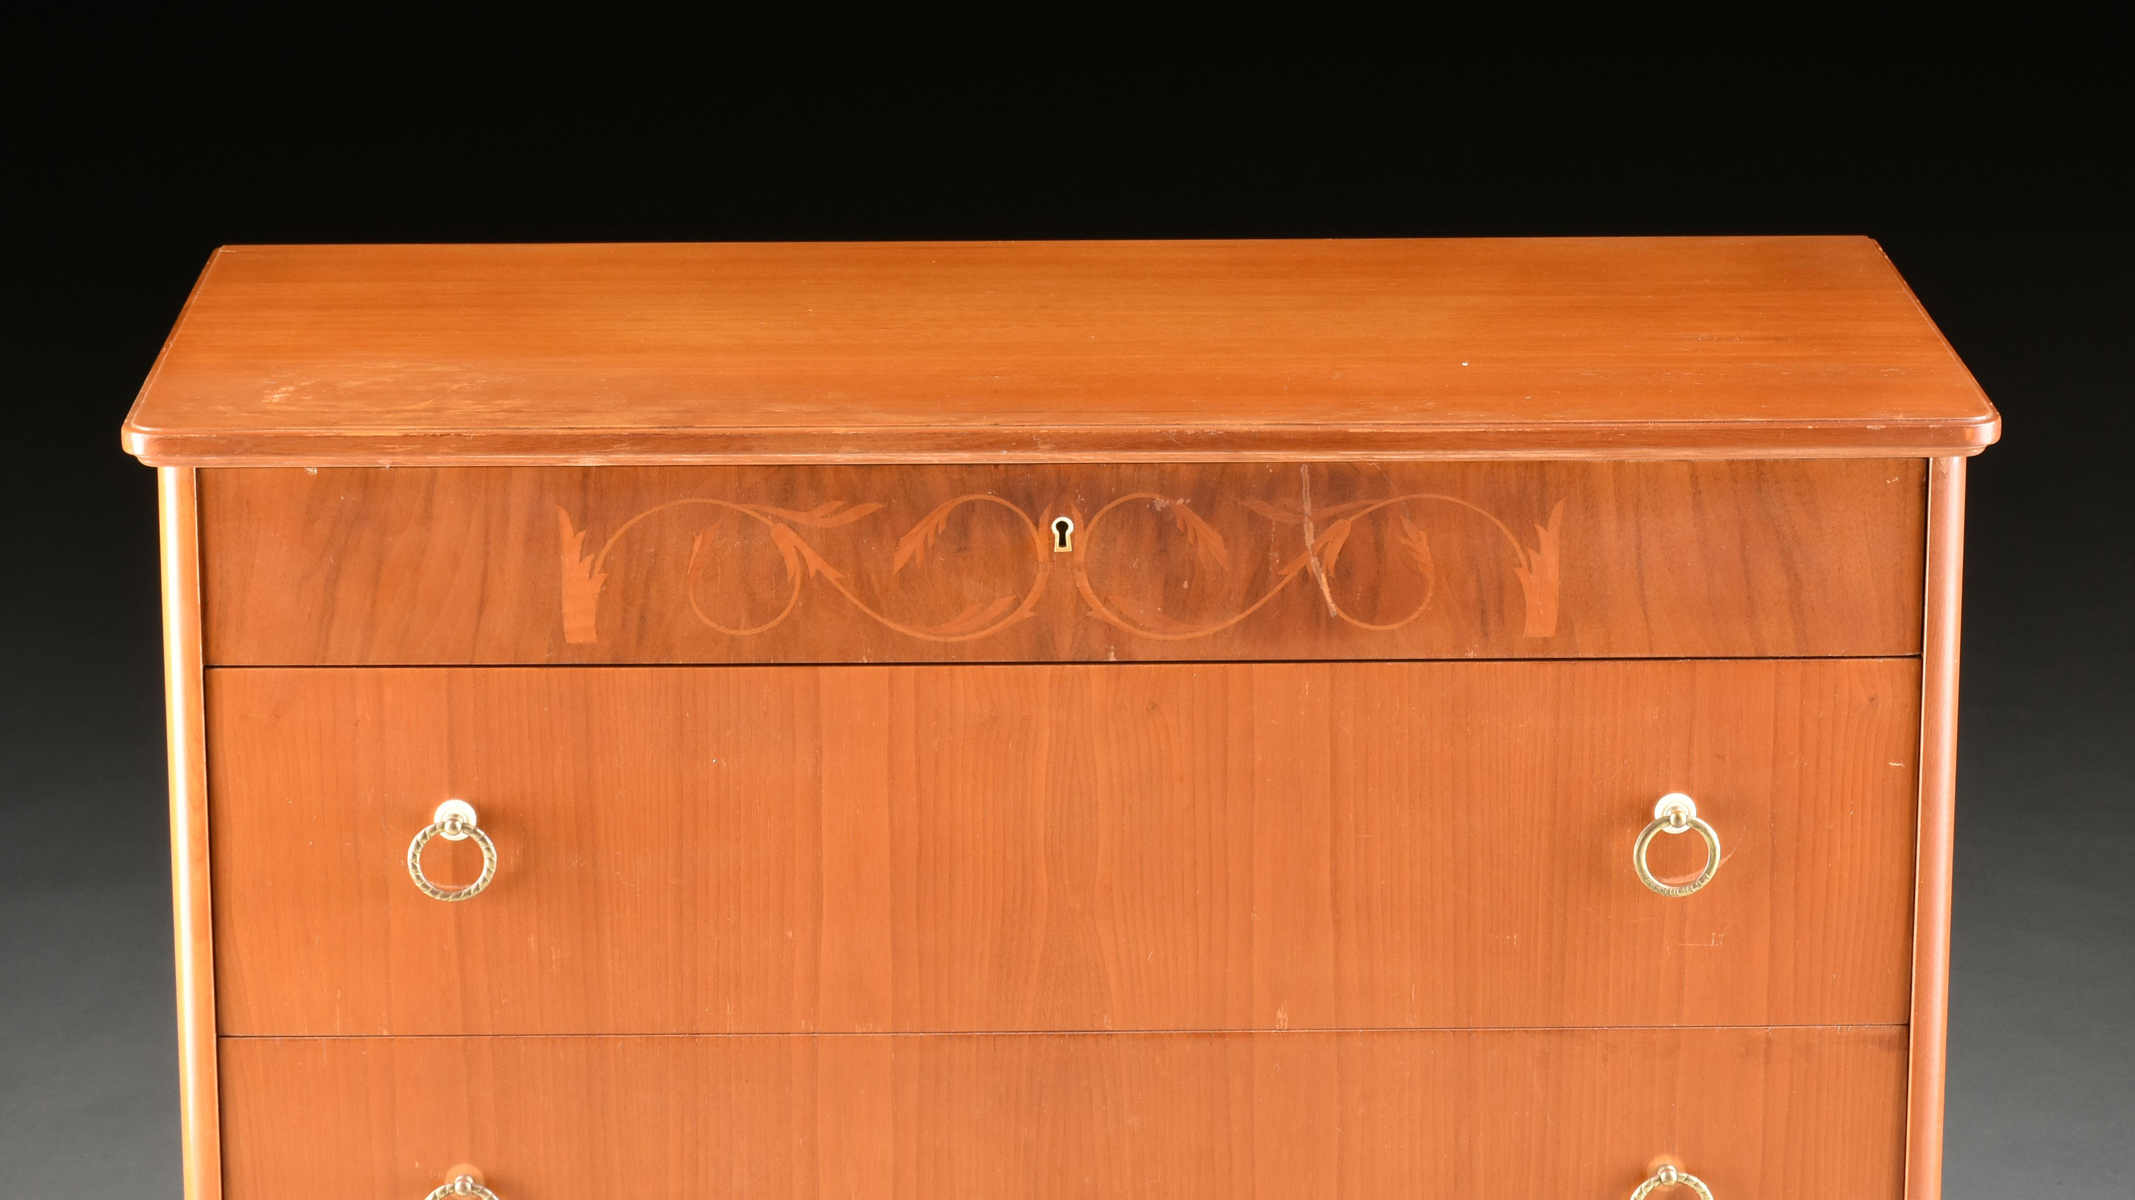 A MID-CENTURY MODERN MARQUETRY INLAID BIRCH CHEST OF DRAWERS, POSSIBLY SCANDINAVIAN, SIGNED, 1951, - Image 2 of 8